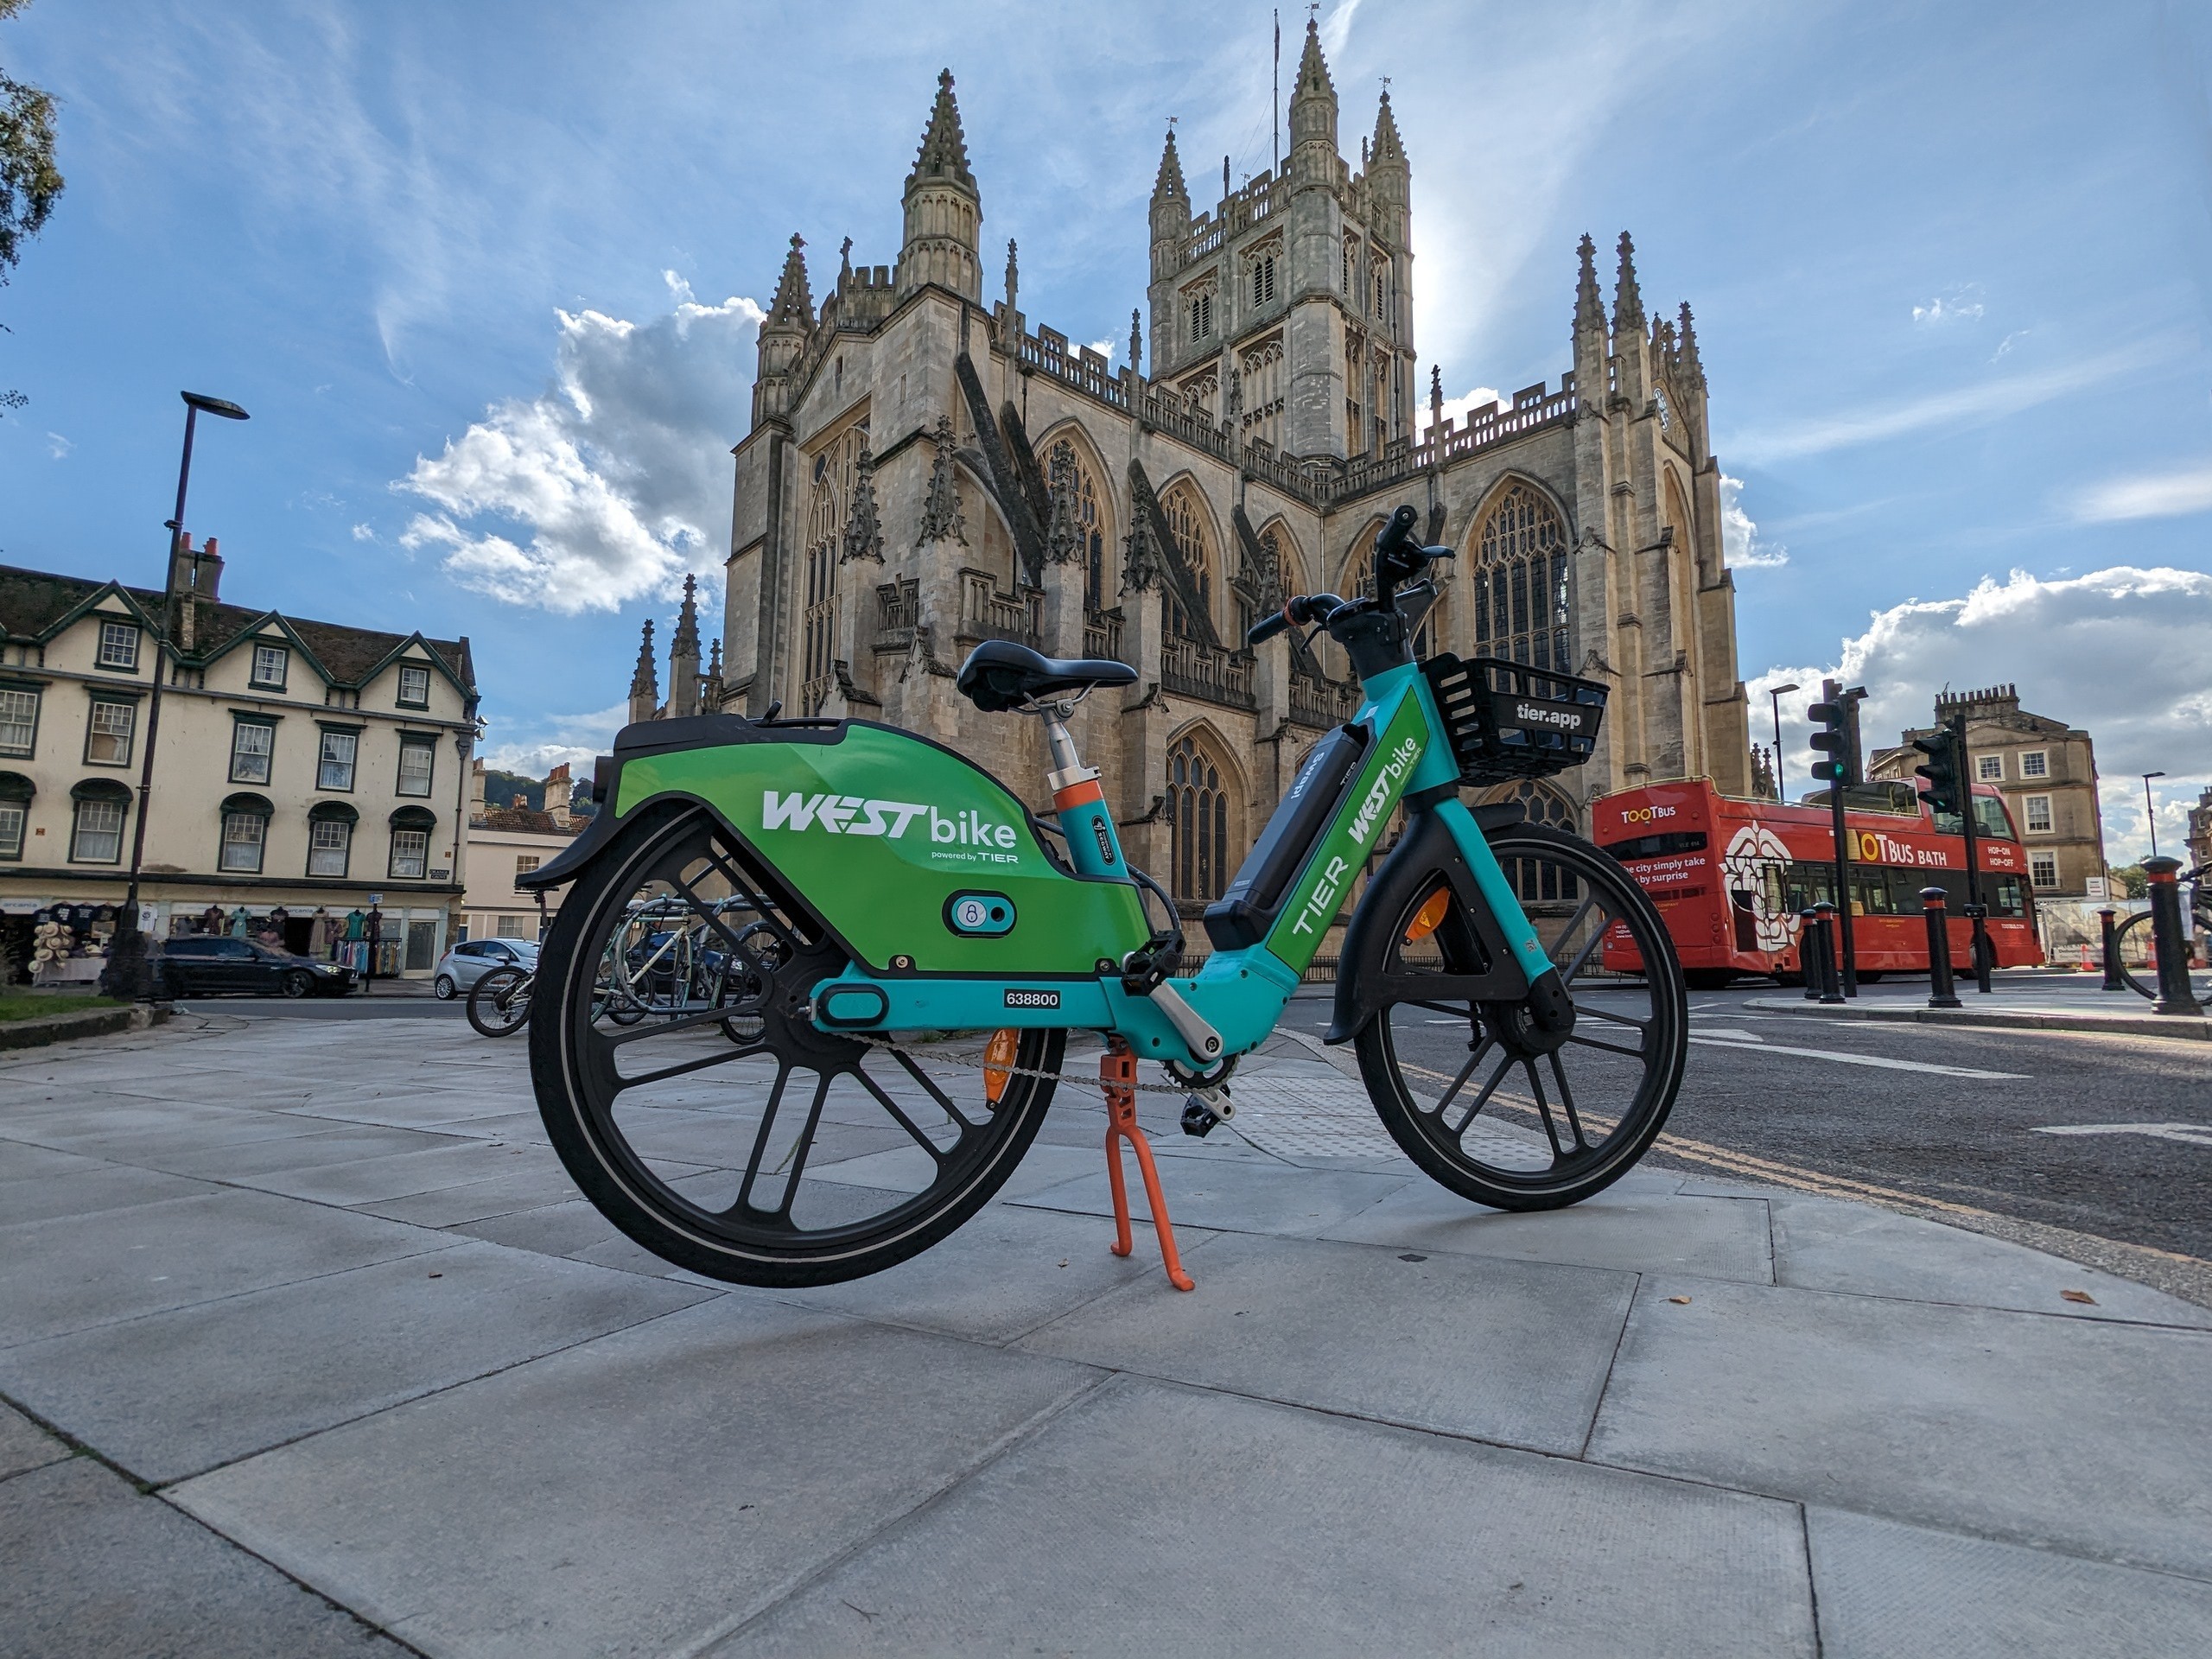 Council to closely monitor impact of e-bikes in Bath